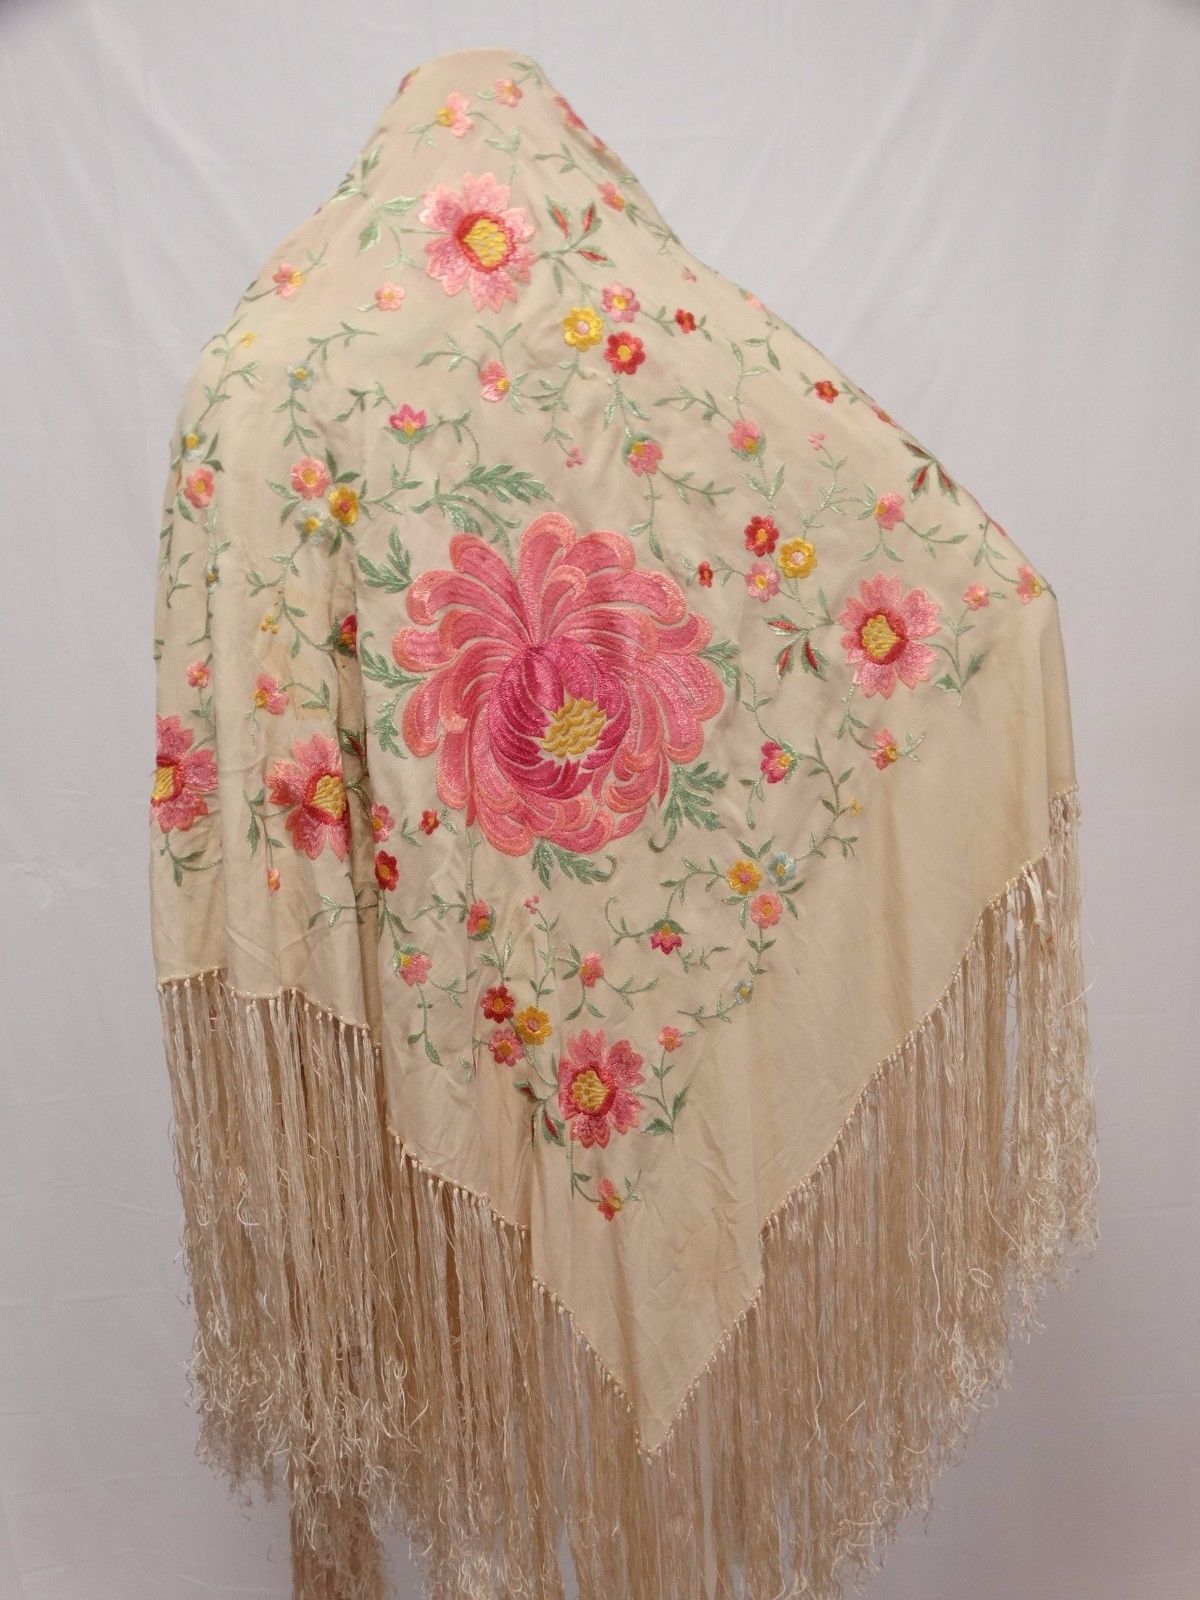 ANTIQUE SILK PIANO SHAWL FLORAL EMBROIDERED LONG FRINGE VIVID PINK FLOWER